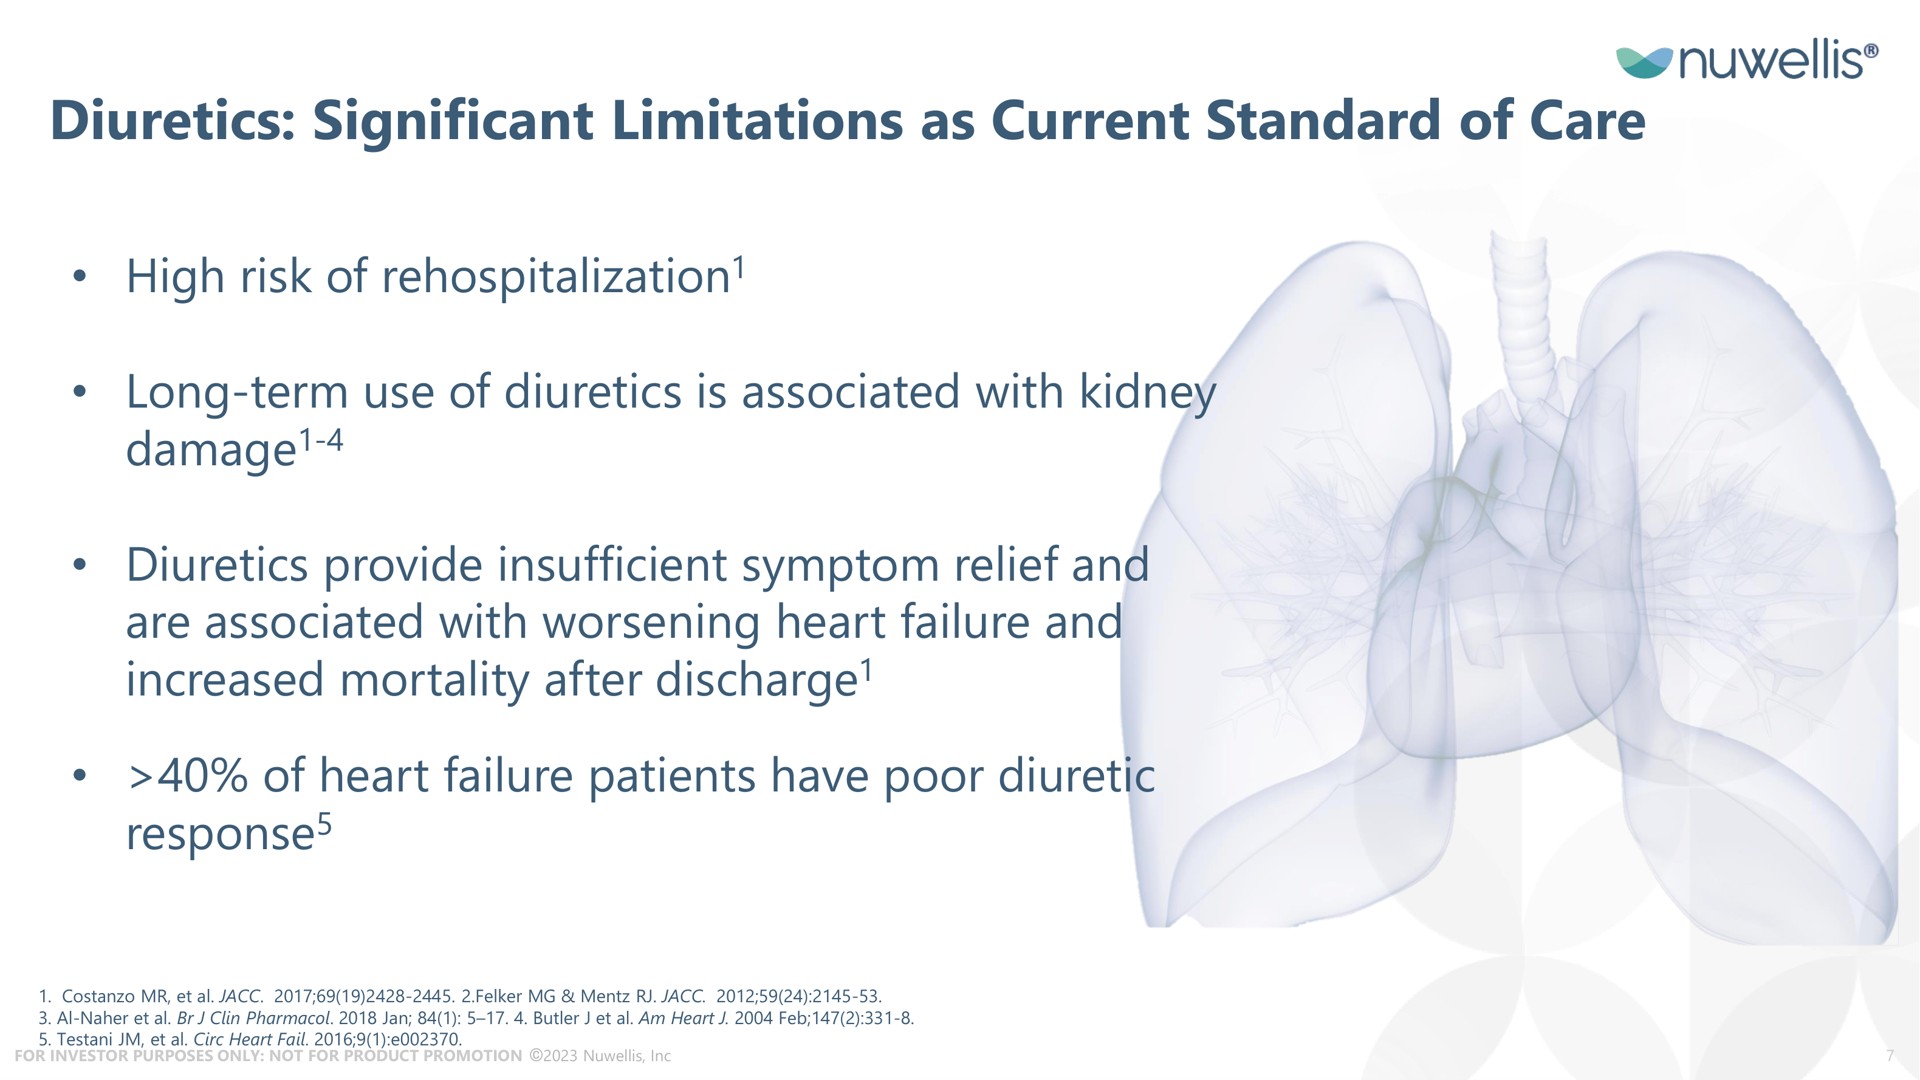 diuretics significant limitations as current standard of care high risk of long term use of diuretics is associated with kidney damage diuretics provide insufficient symptom relief and are associated with worsening heart failure and increased mortality after discharge of heart failure patients have poor diuretic response damage discharge response | Nuwellis